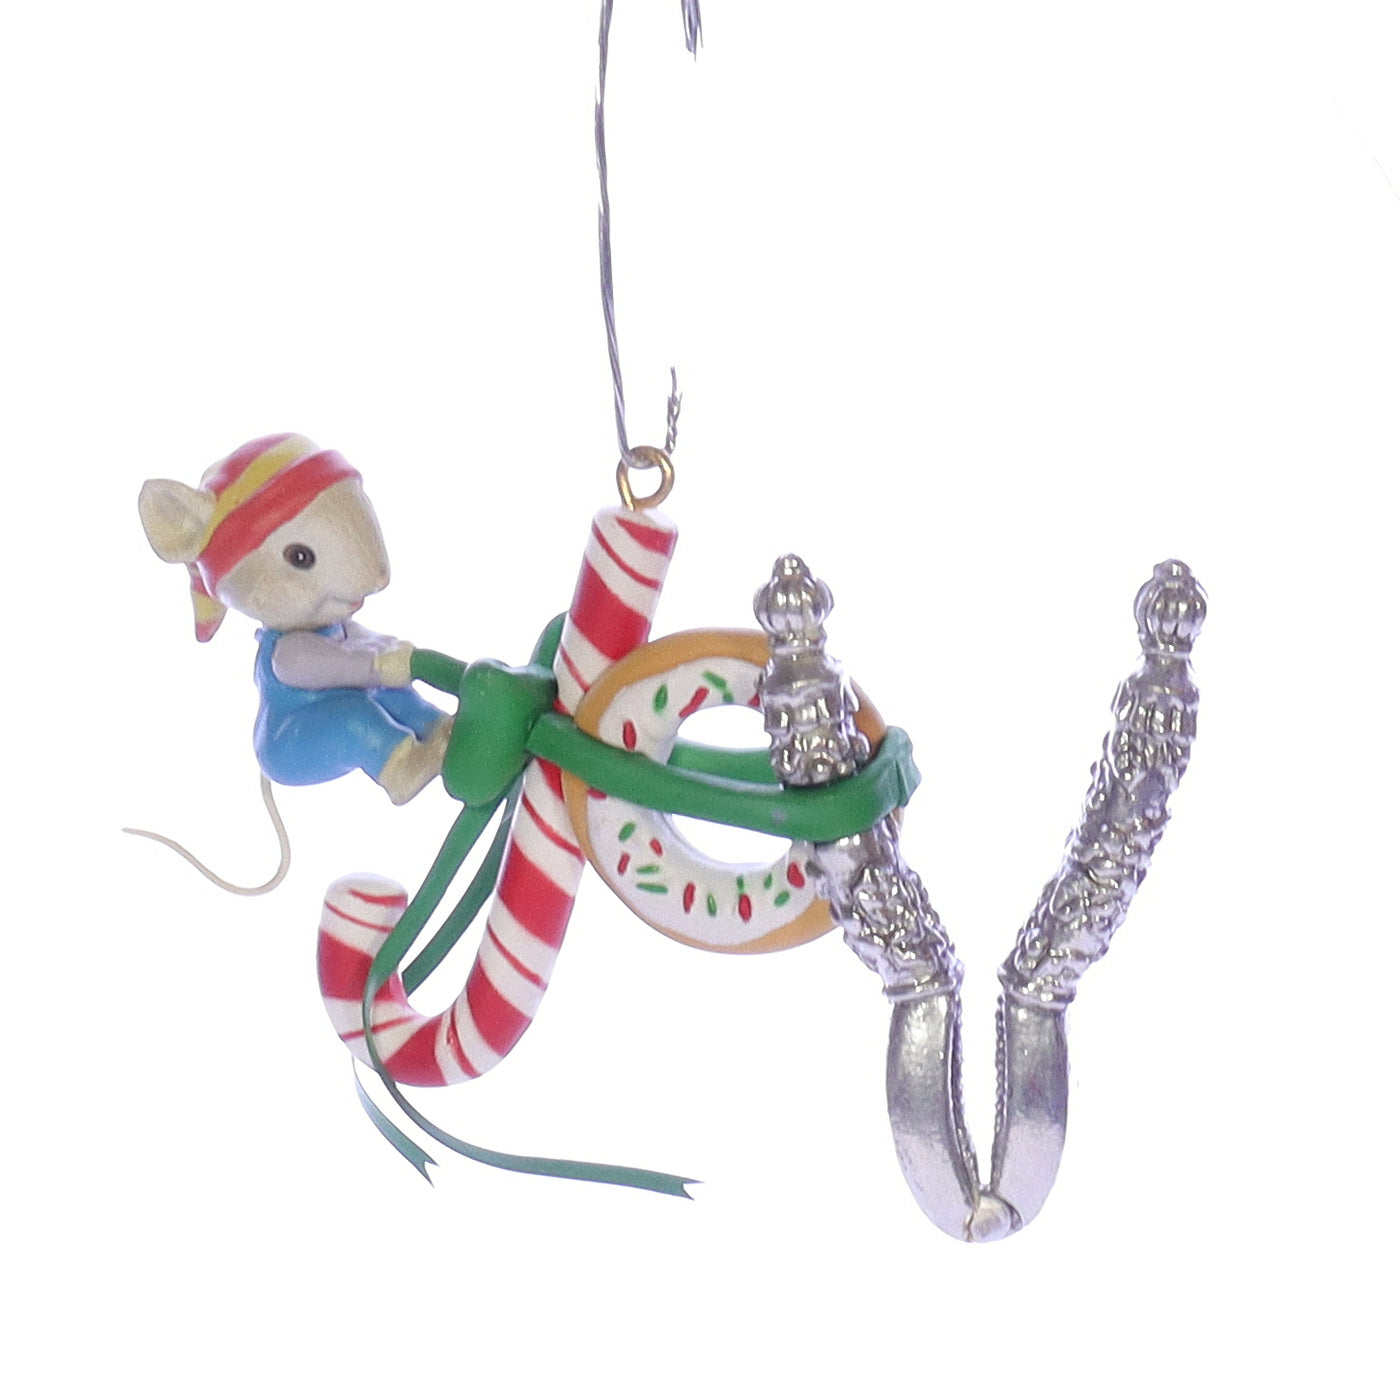 Enesco_Treasury_of_Christmas_Ornaments_830488_Tie-dings_of_Joy_Mouse_Ornament_1991 Back Right View